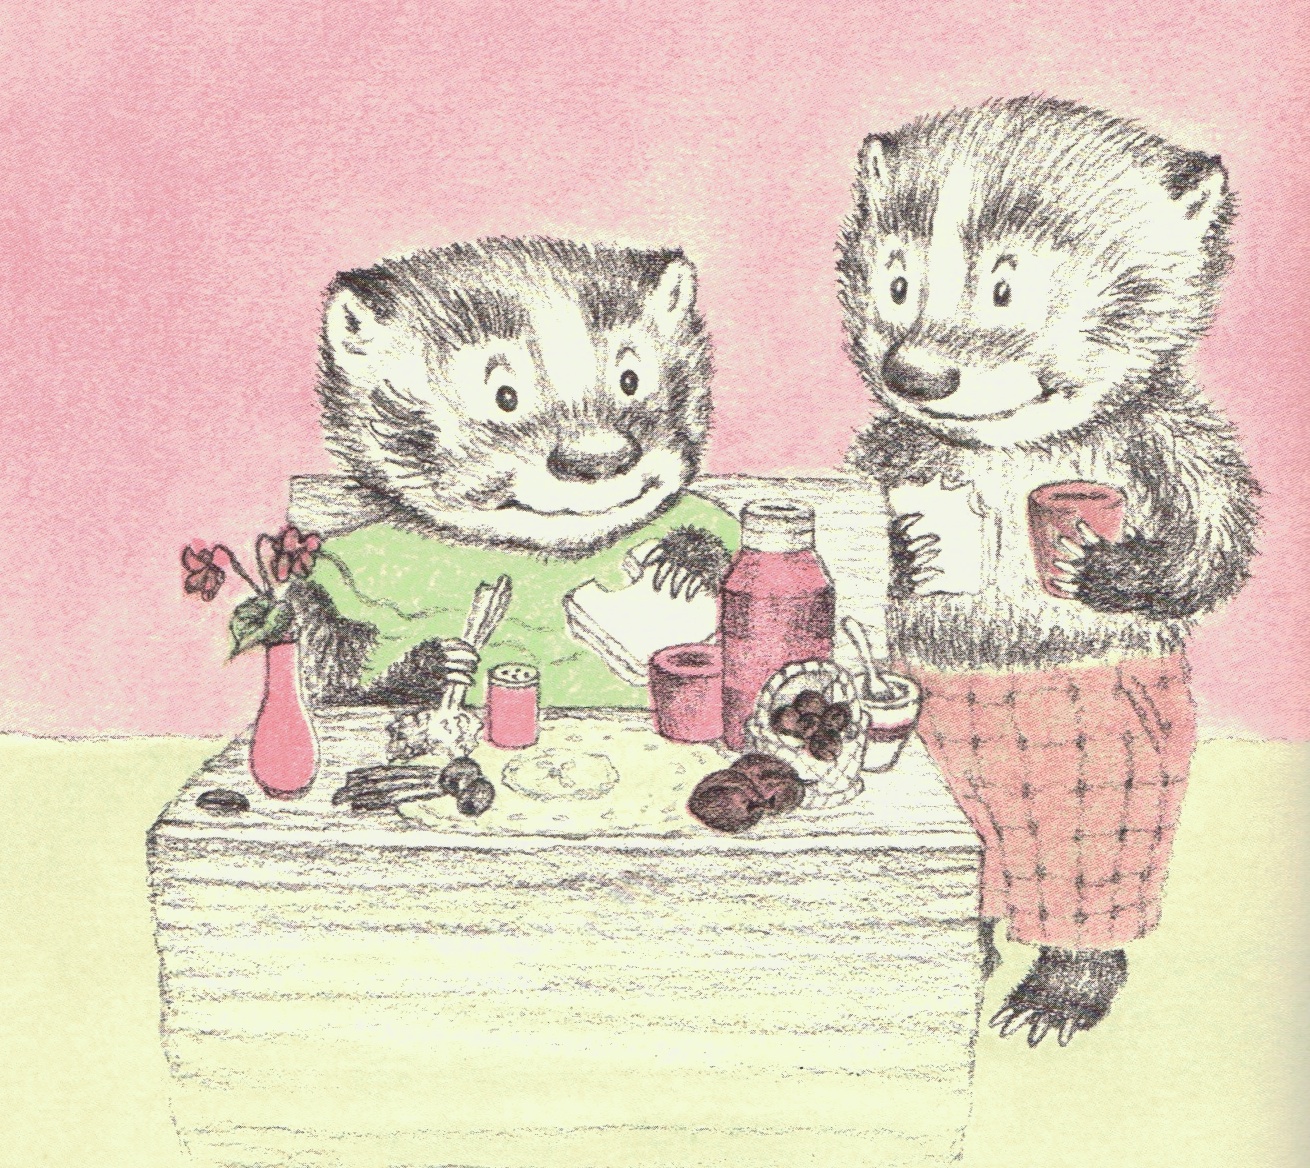 Image of "Bread and Jam for Frances:" Frances and Albert Having  Lunch